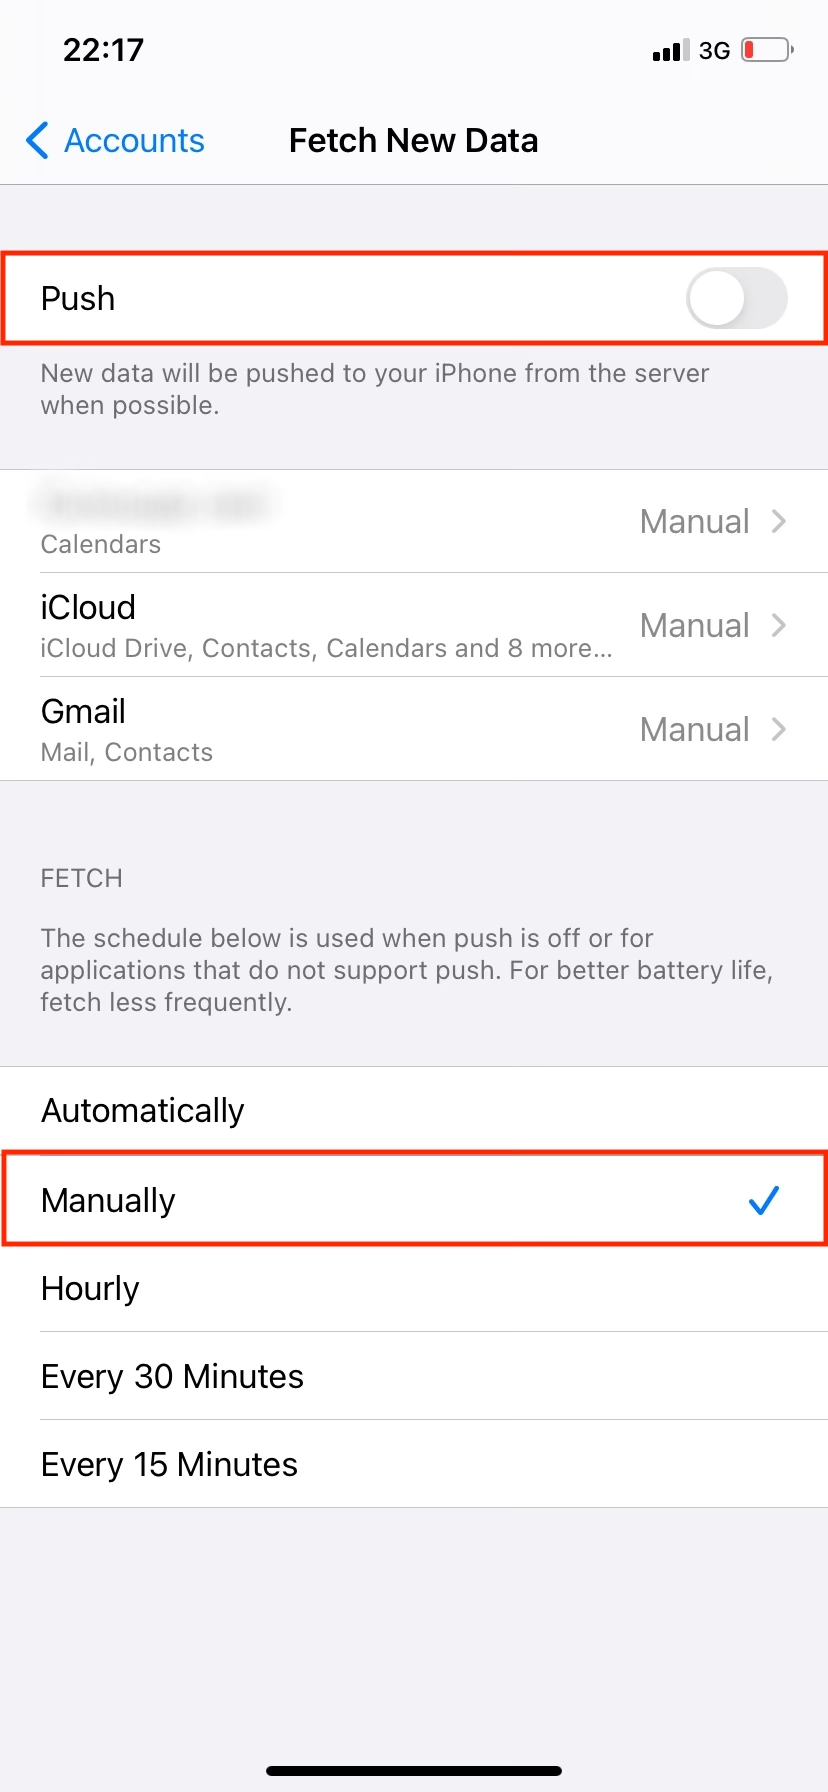 Fetch Manually, Push Off on iPhone